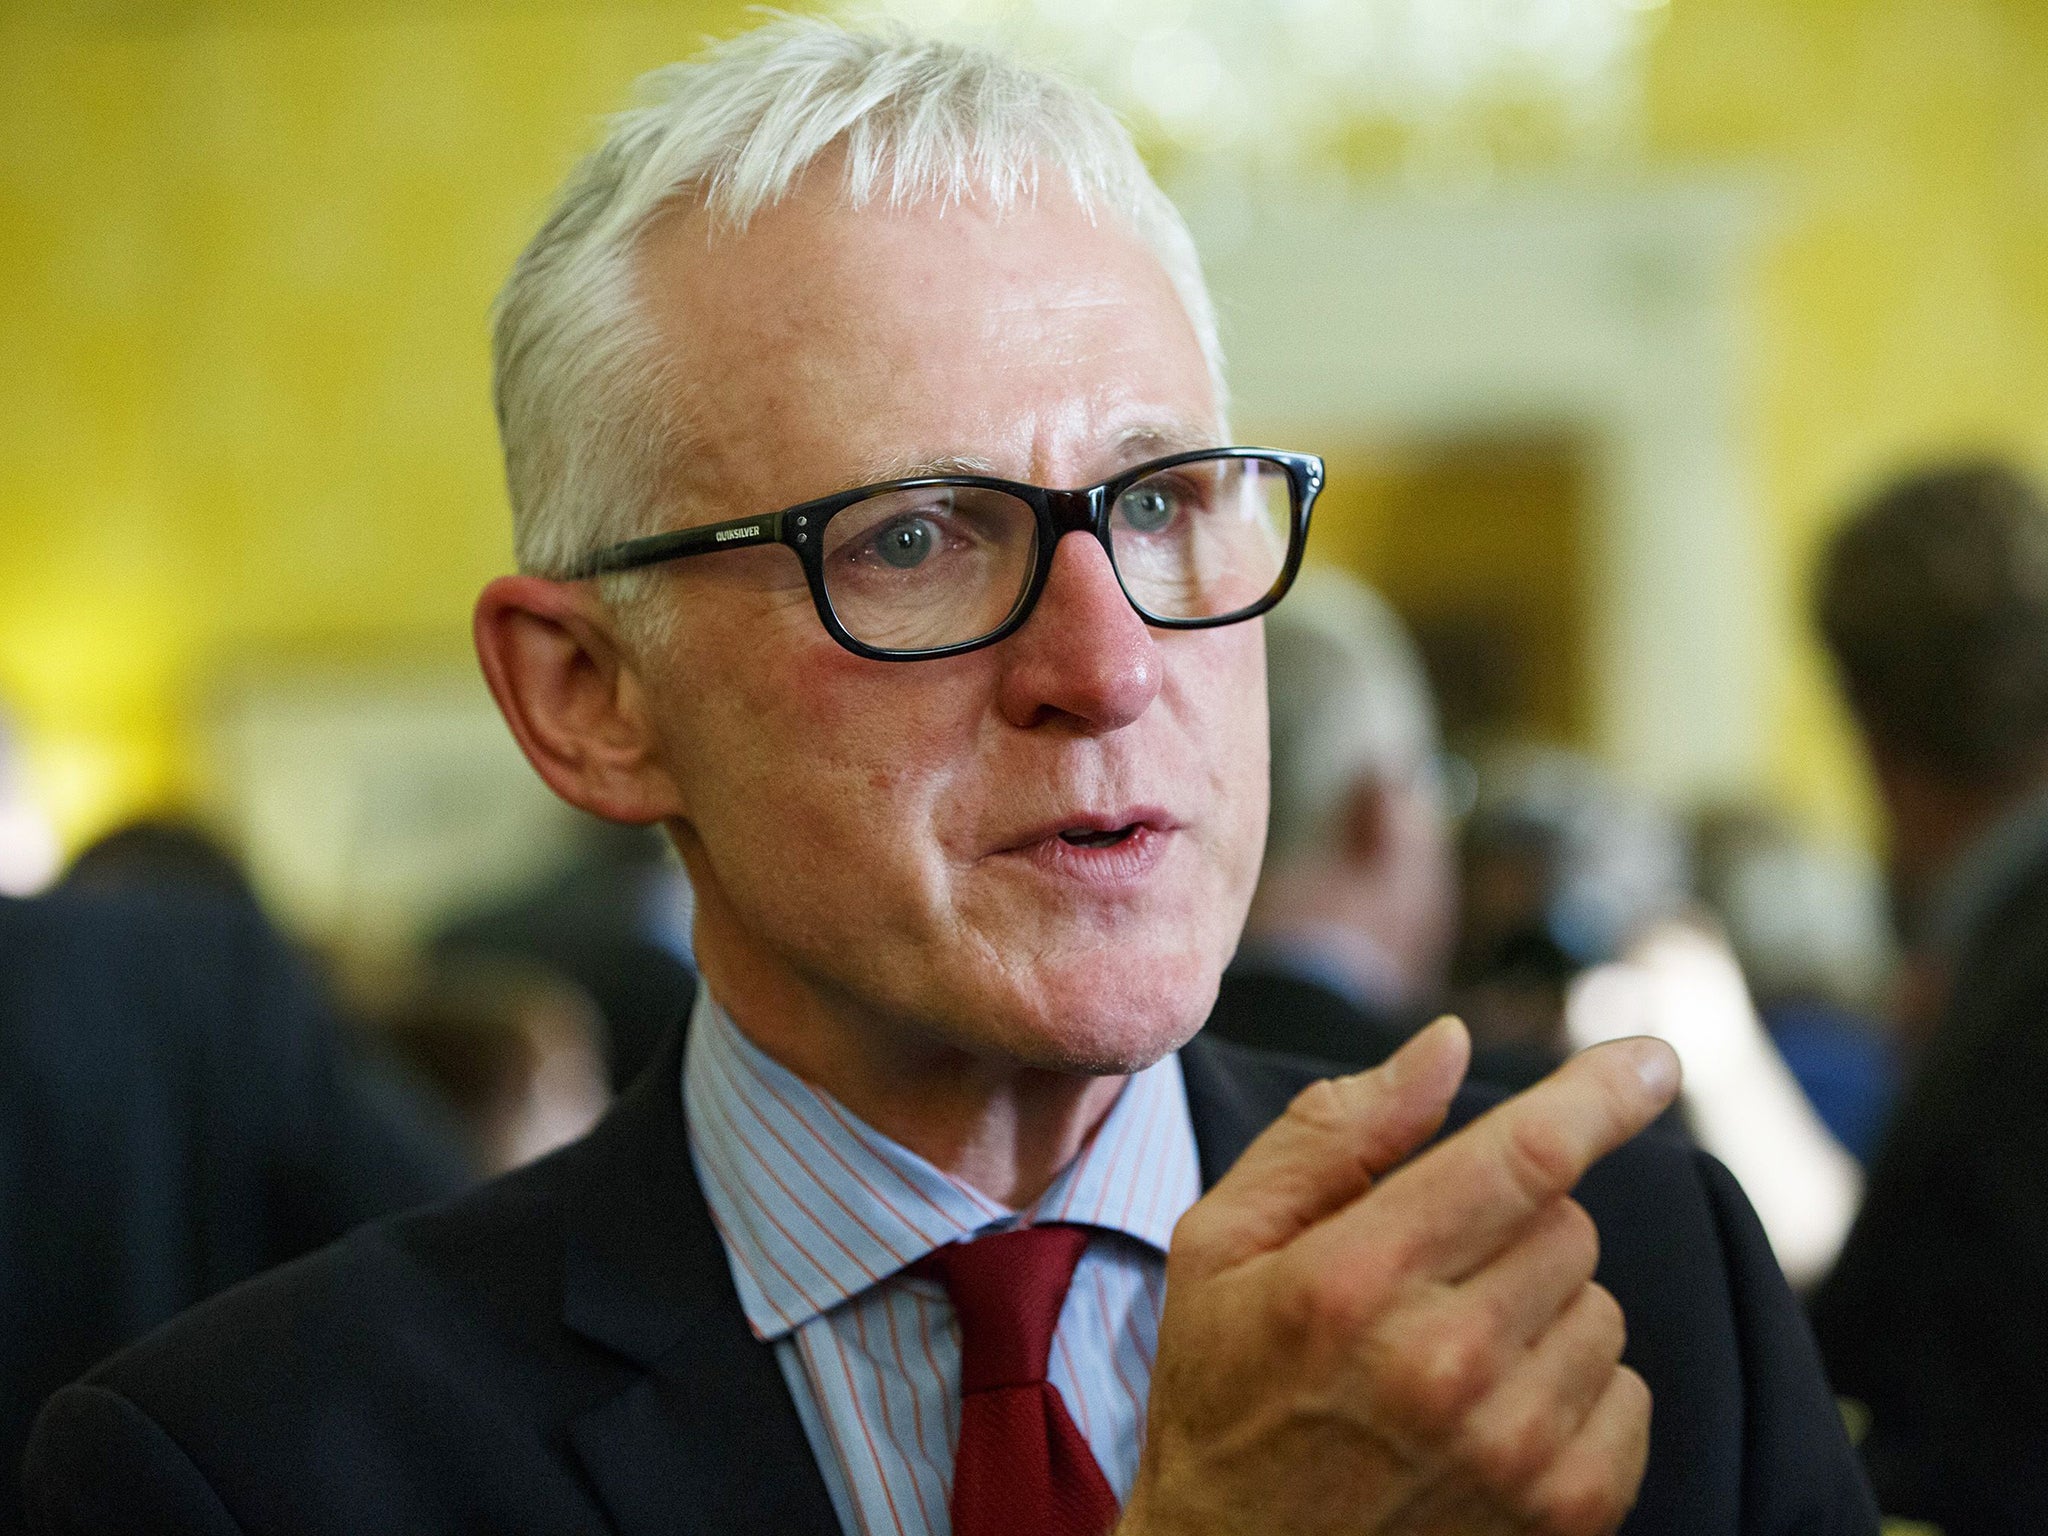 Lib Dem MP Norman Lamb said the burden is with supporters of the status quo to explain why prohibition should remain